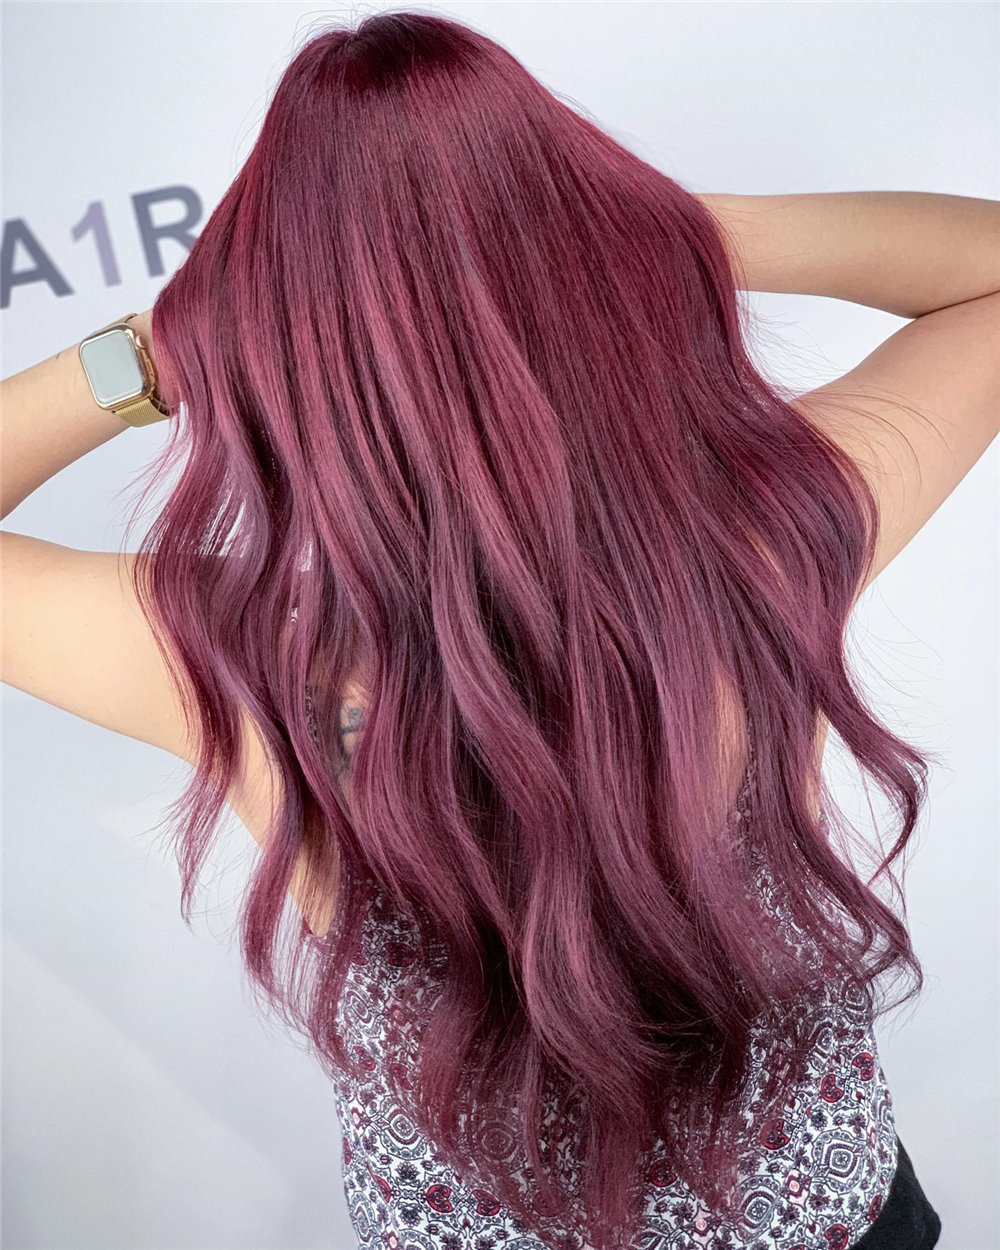 Burgundy Hair Color Trends 2022 for the Fall, burgundy hair color ideas, maroon haircuts for women